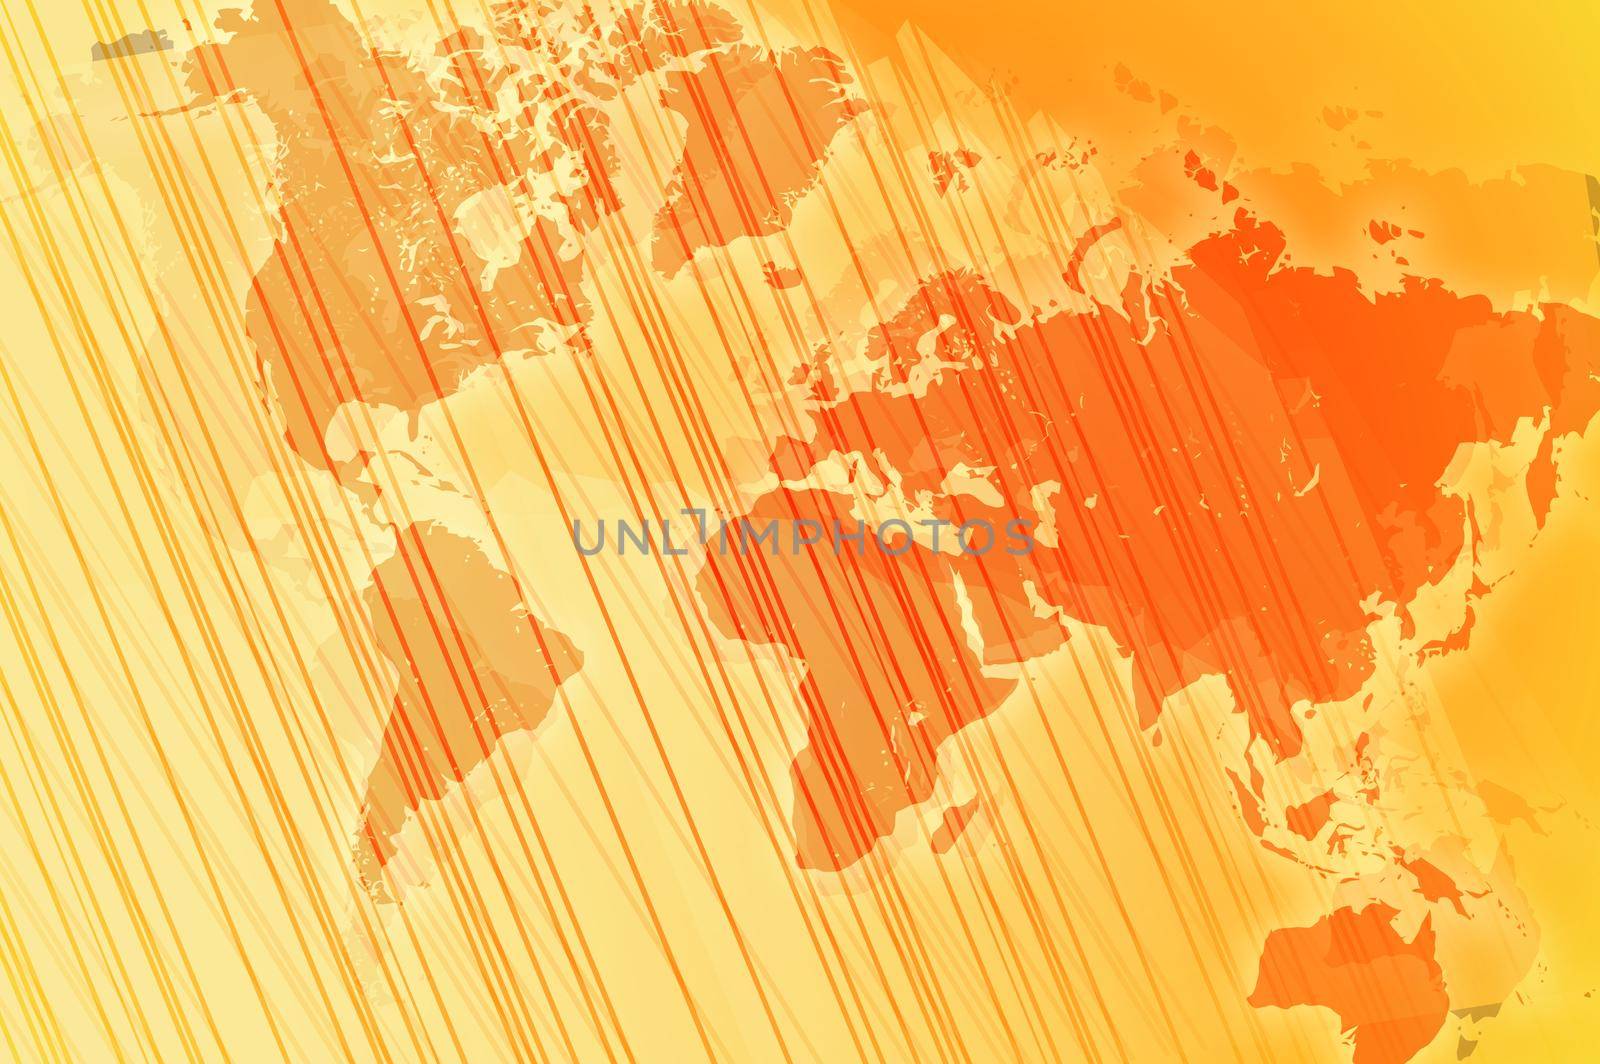 Orange - Yellow Business Background Design with World Map and Stripes.